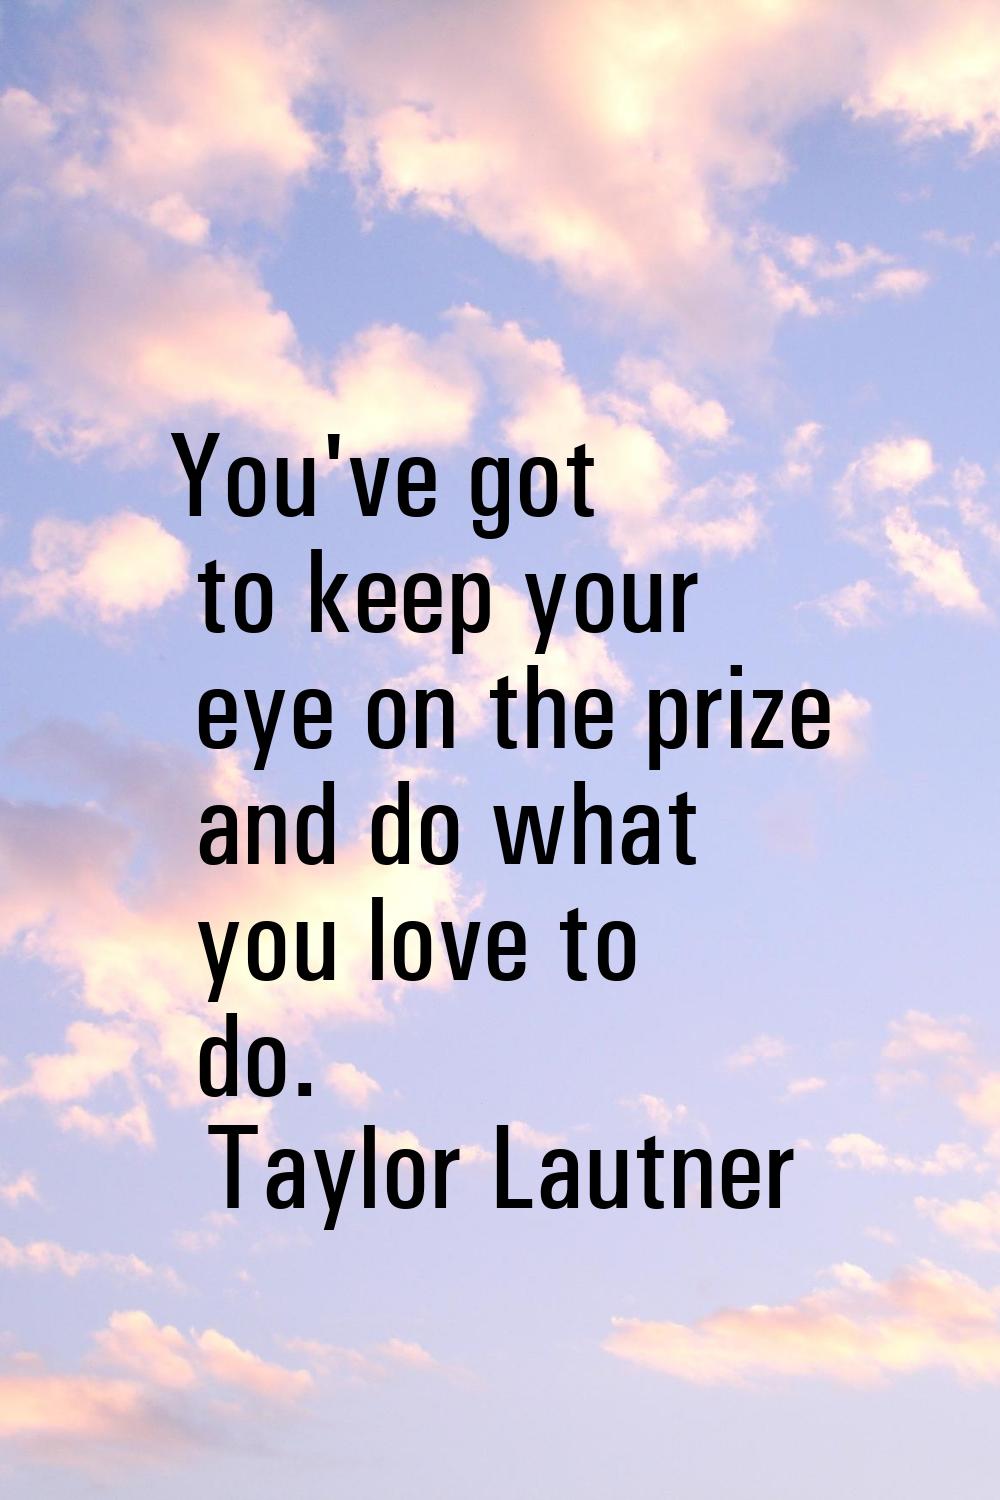 You've got to keep your eye on the prize and do what you love to do.